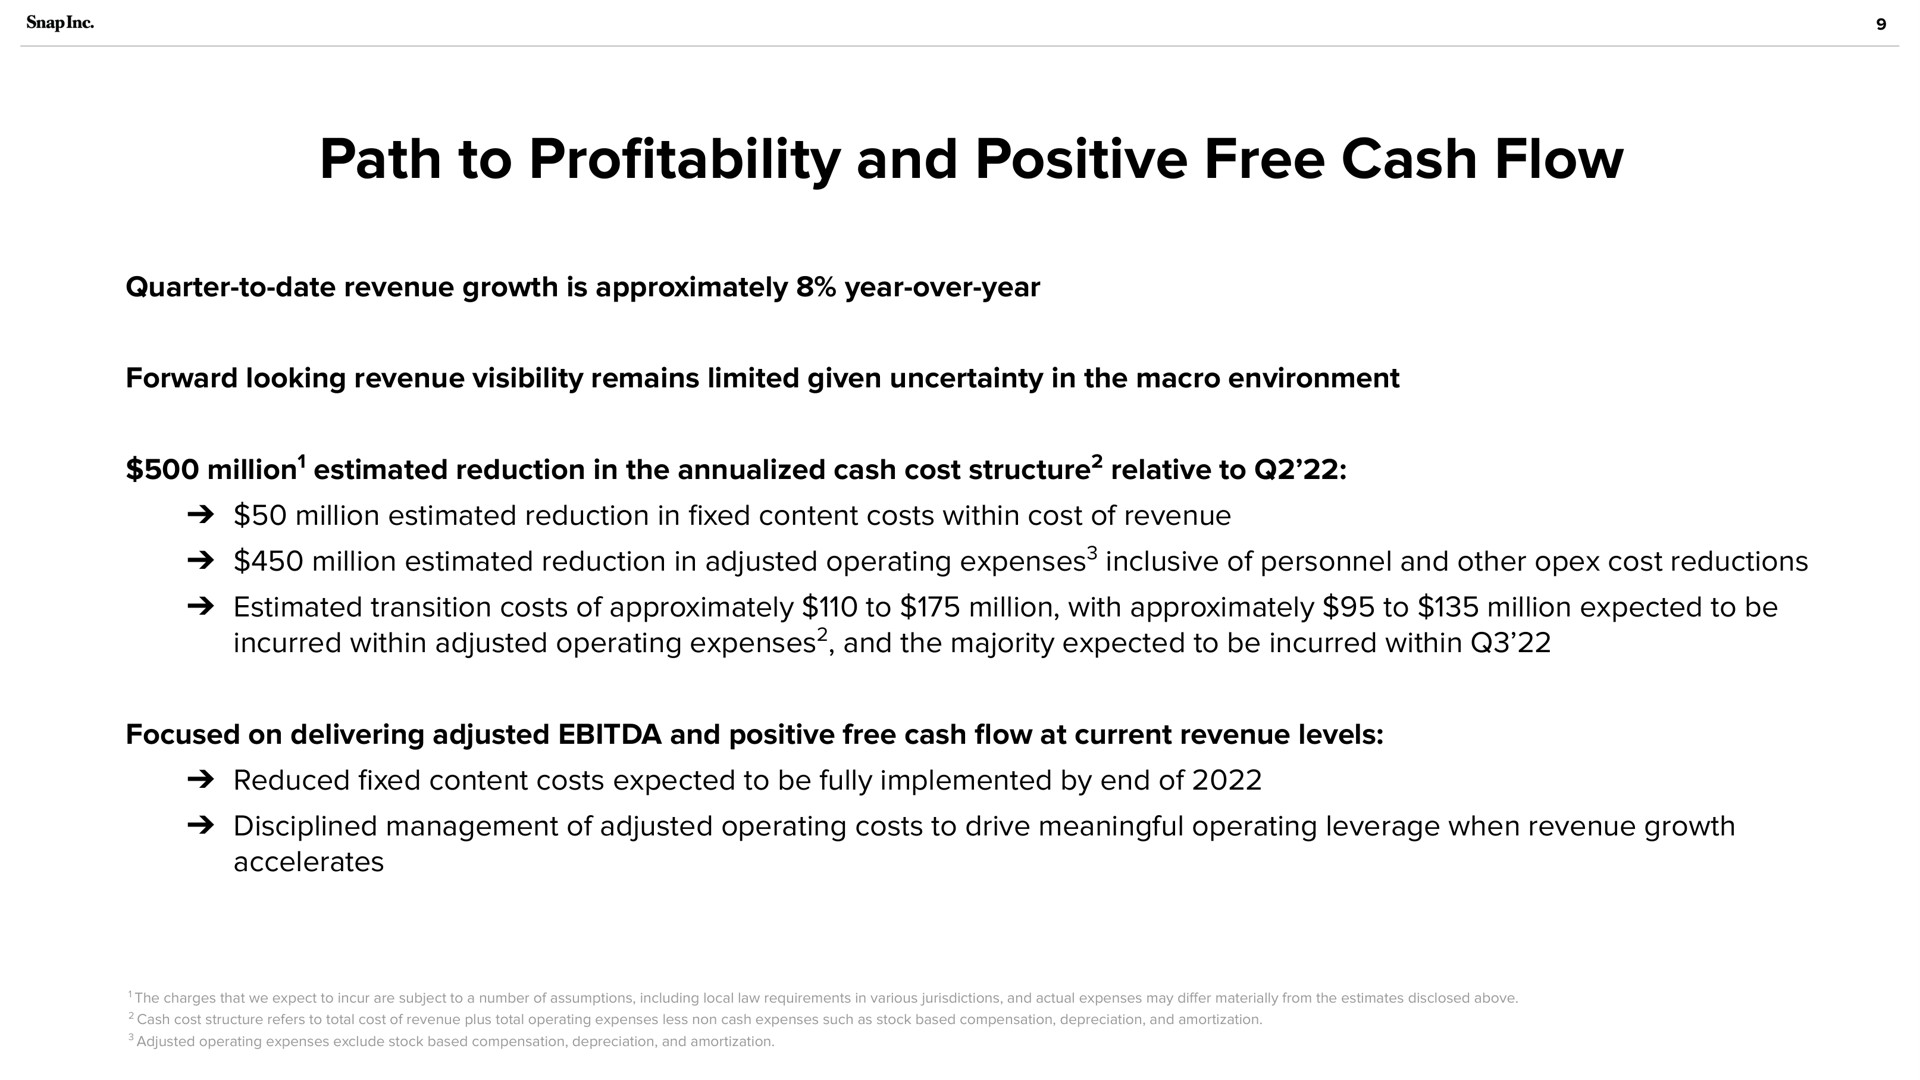 path to pro and positive free cash flow profitability | Snap Inc